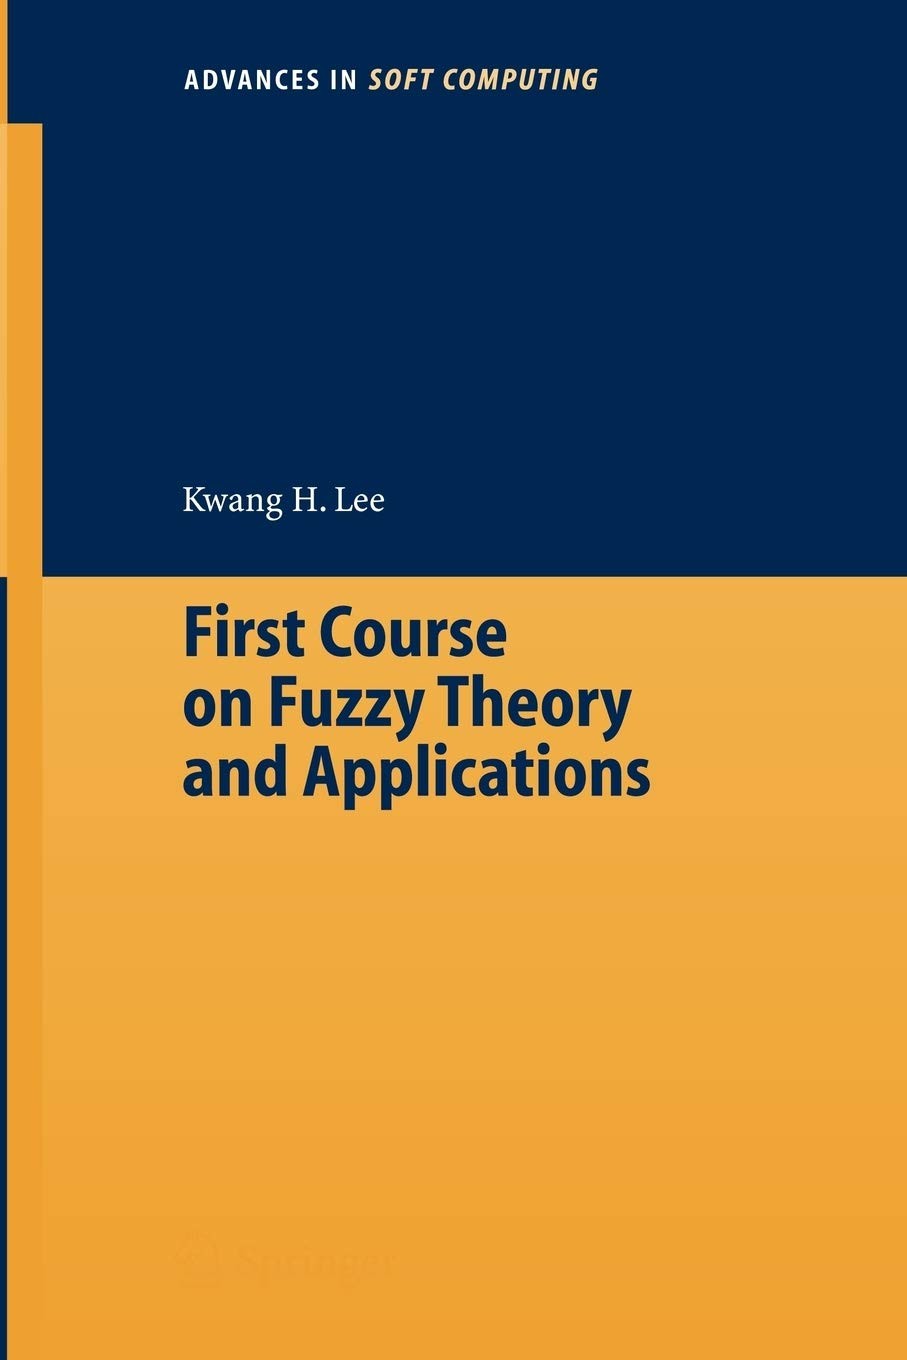 First Course on Fuzzy Theory and Applications